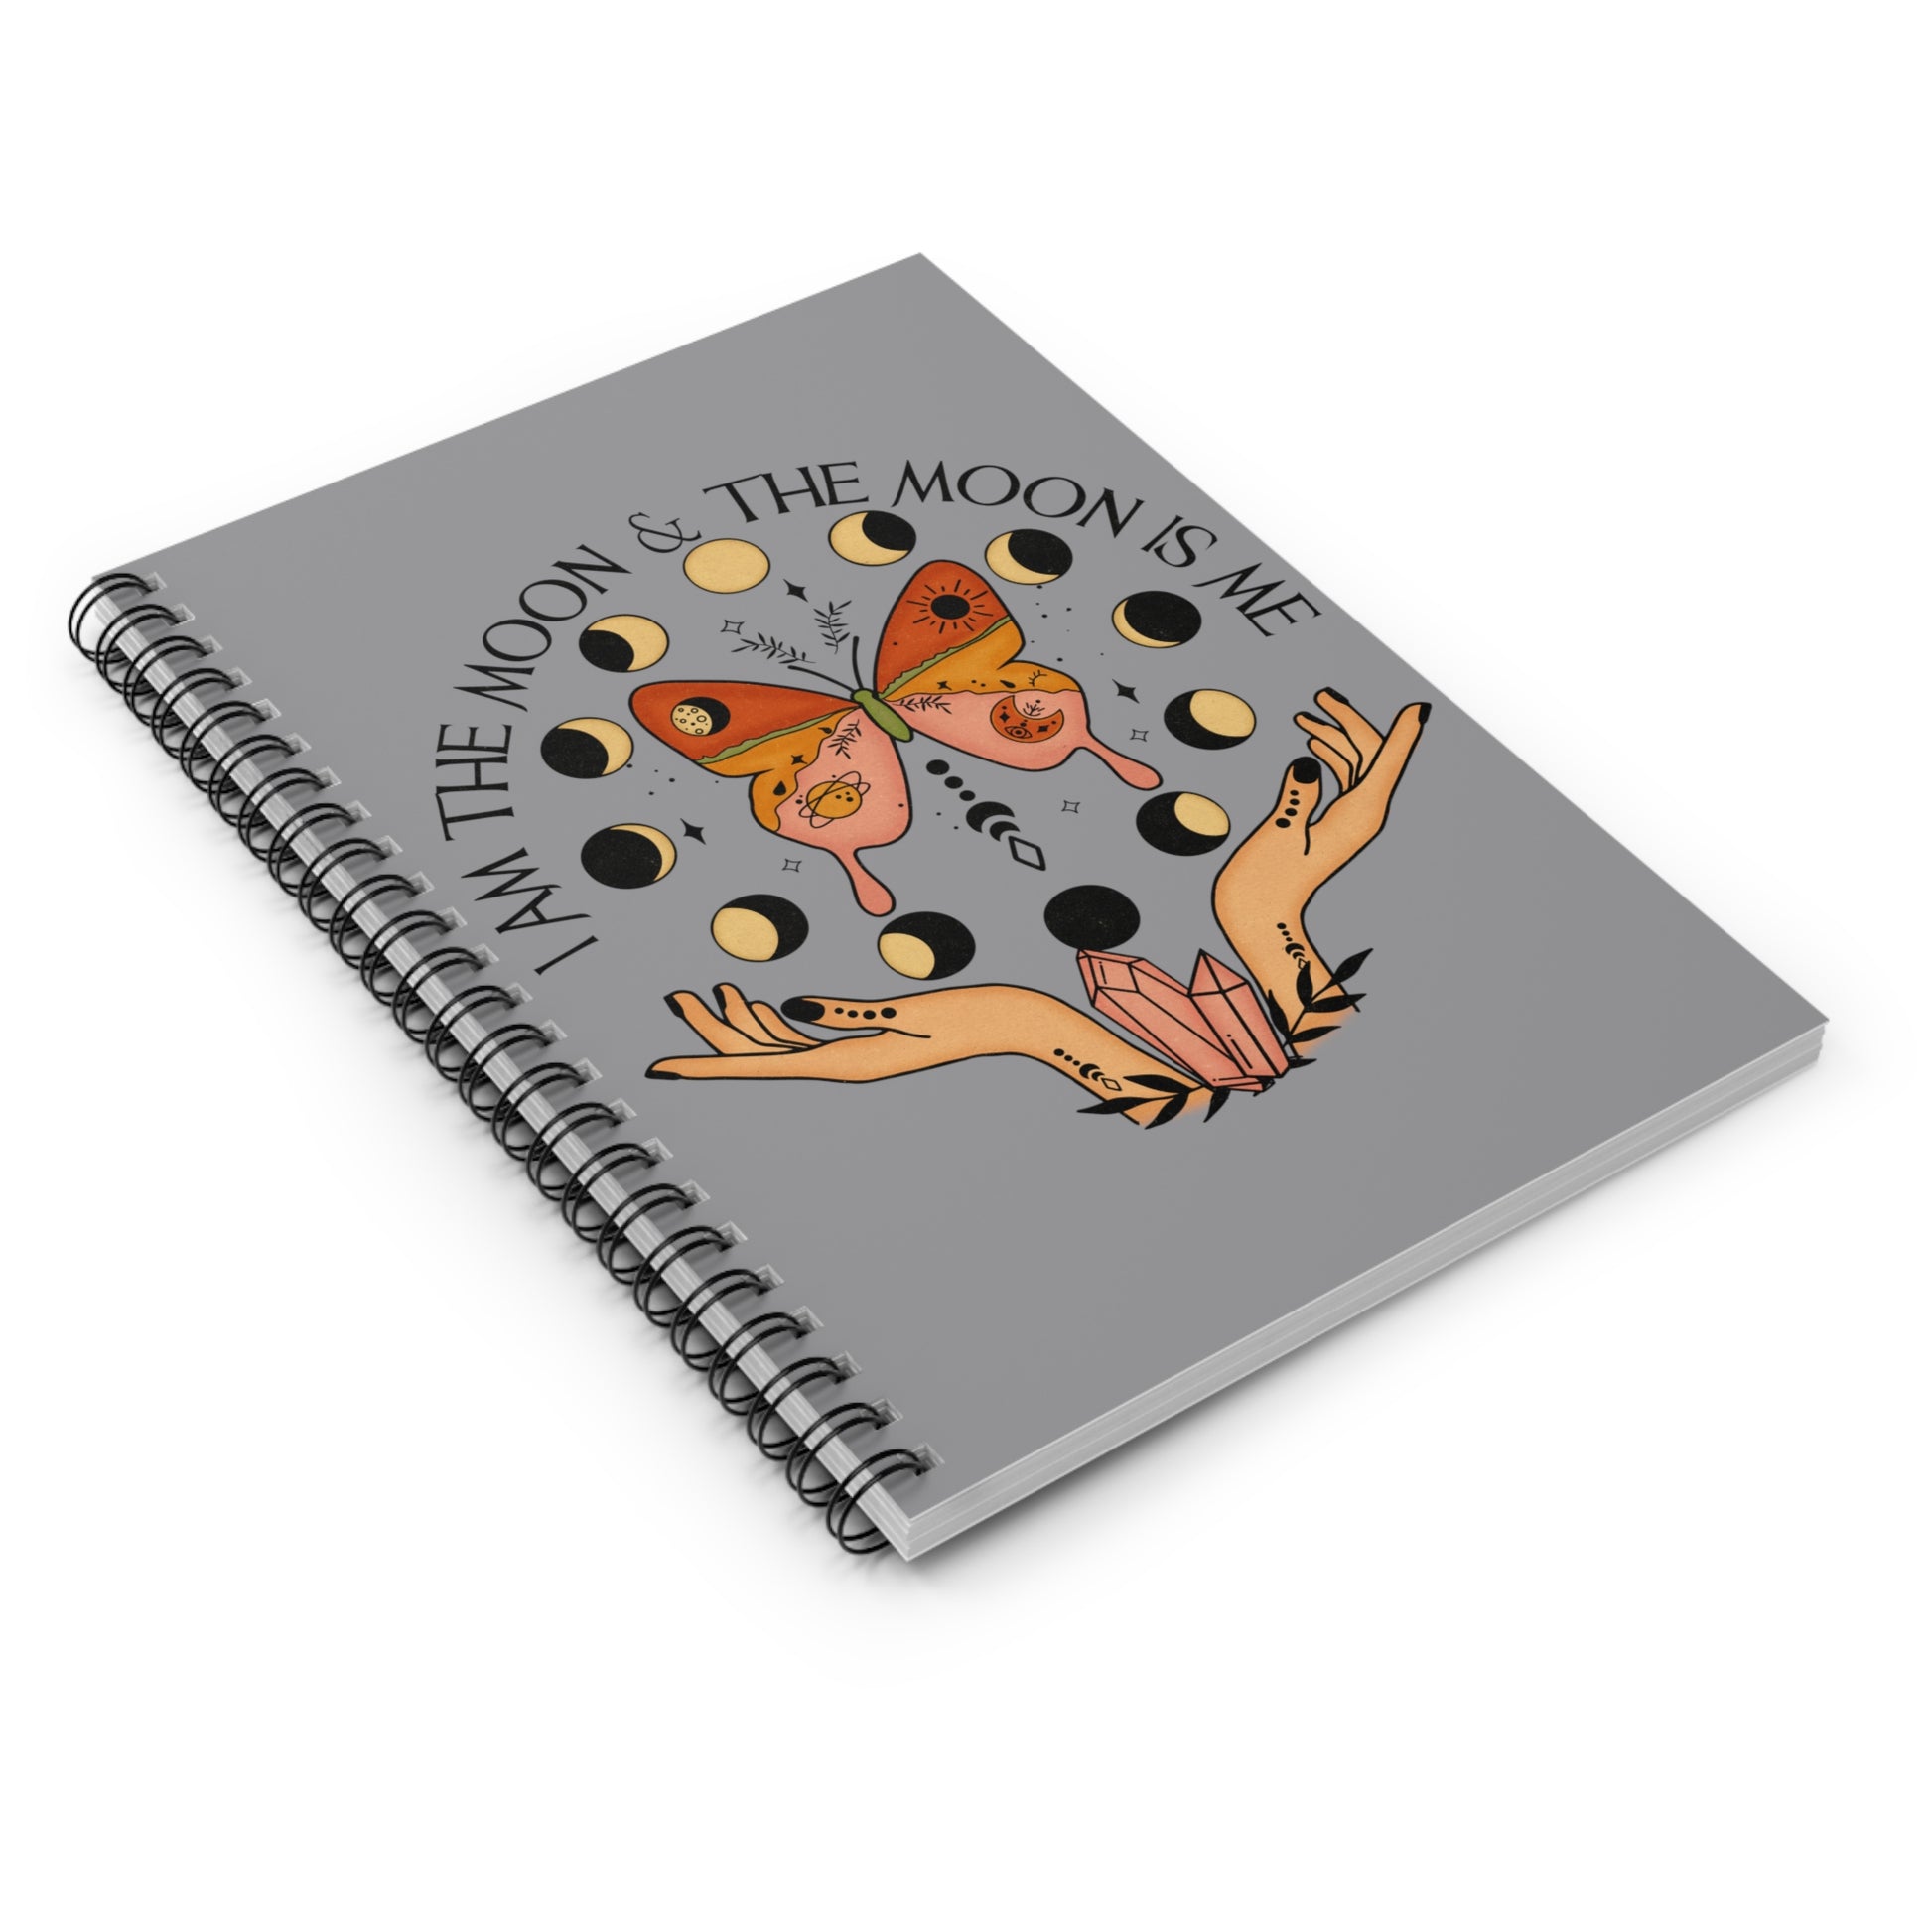 I am the Moon: Spiral Notebook - Log Books - Journals - Diaries - and More Custom Printed by TheGlassyLass